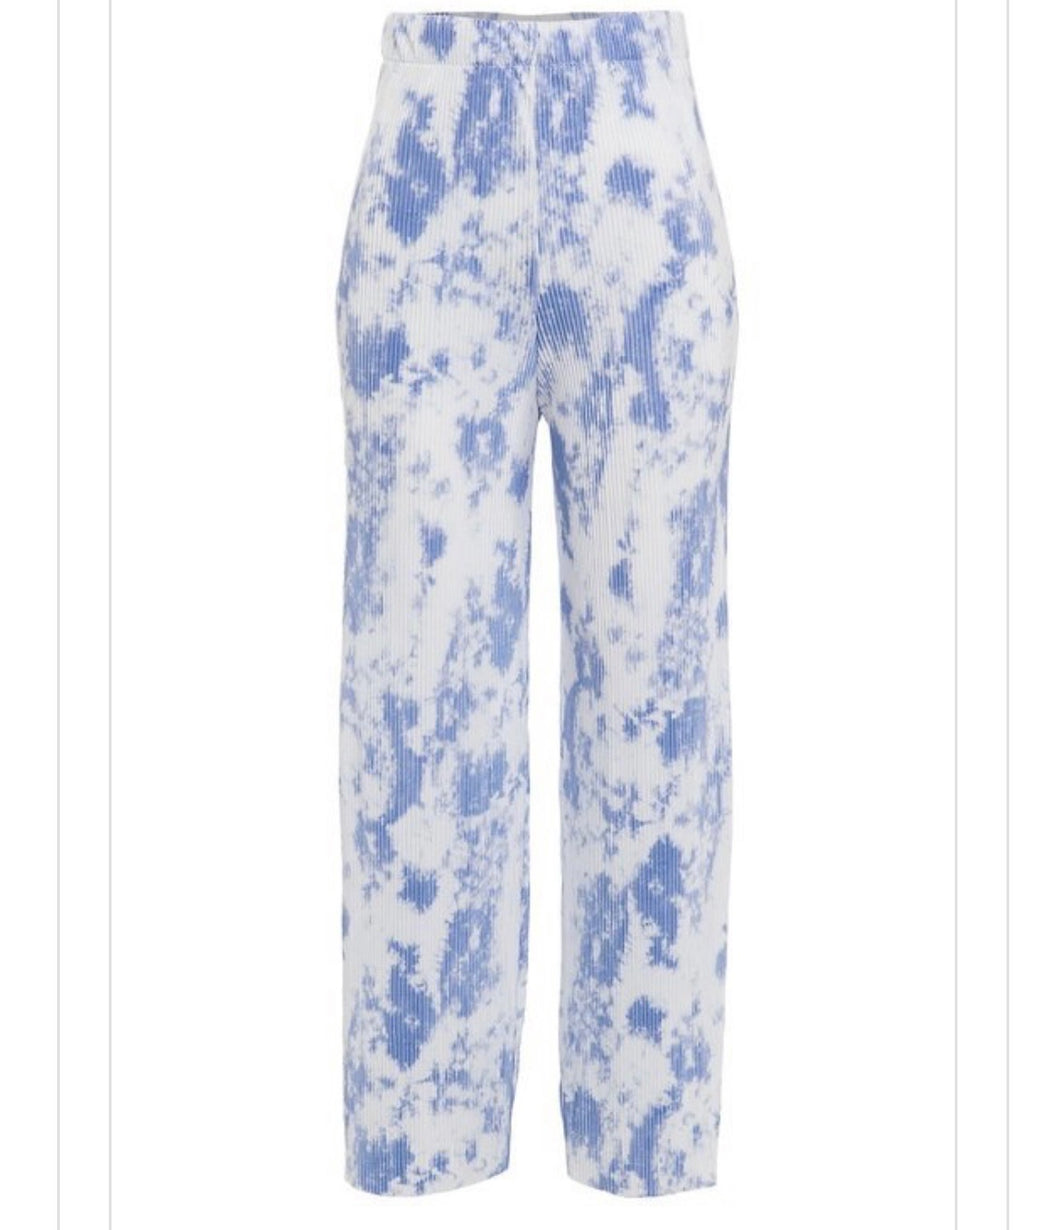 Cotton Candy Pants - STYLE JUNKIE